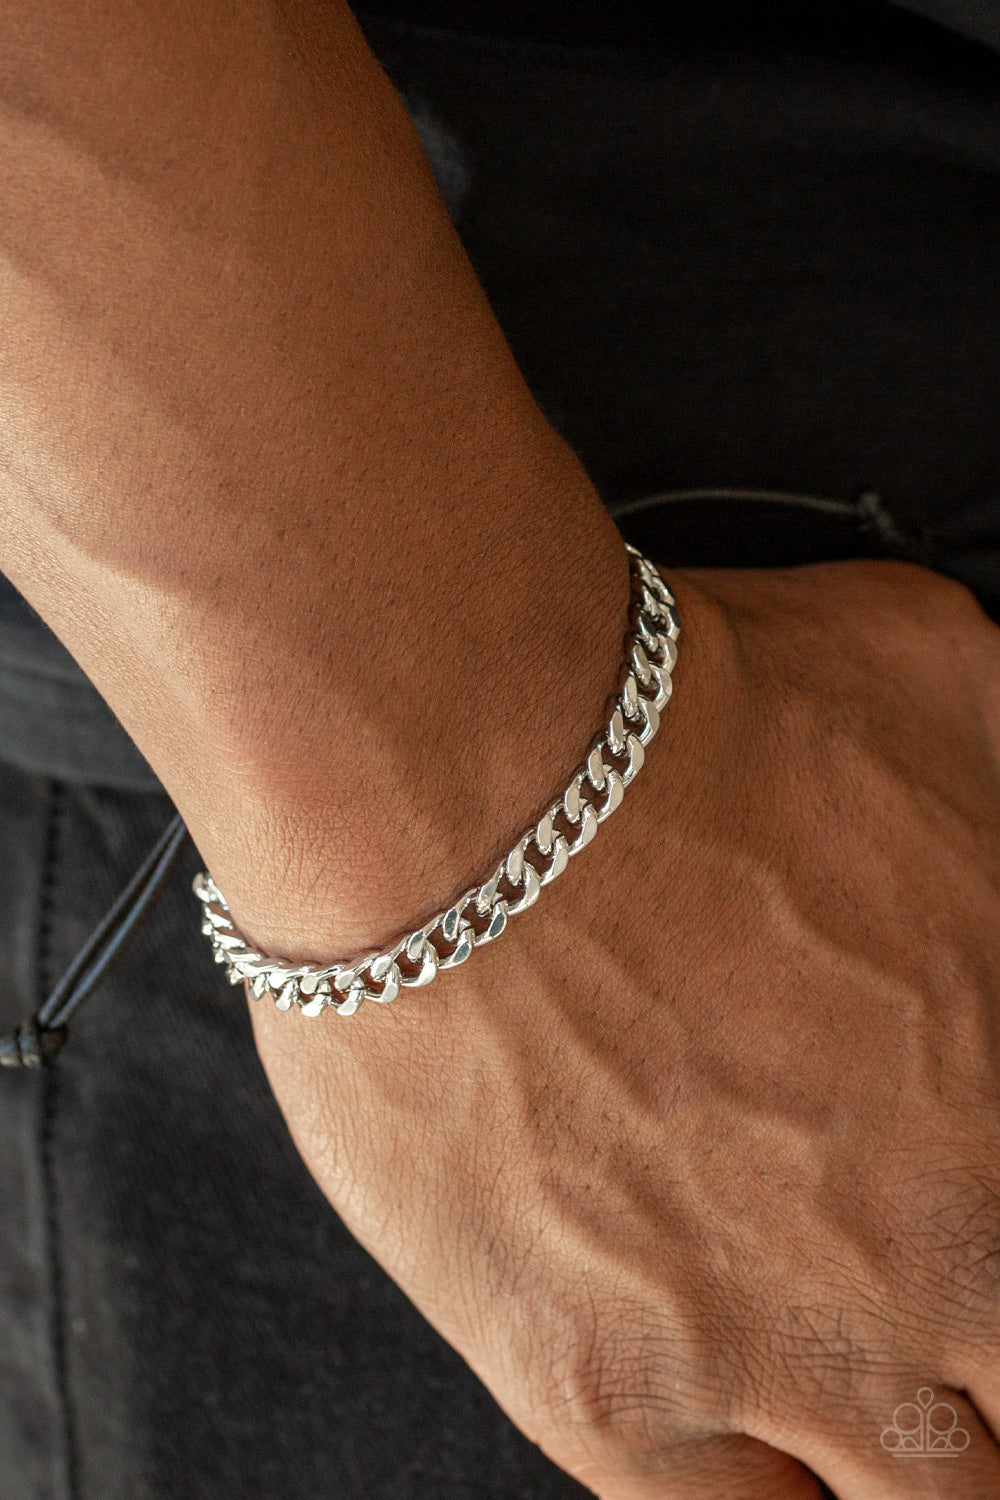 Paparazzi Hurrah - Silver - Beveled Curb Chain - Black Braided Cord - Men's Bracelet - $5 Jewelry with Ashley Swint